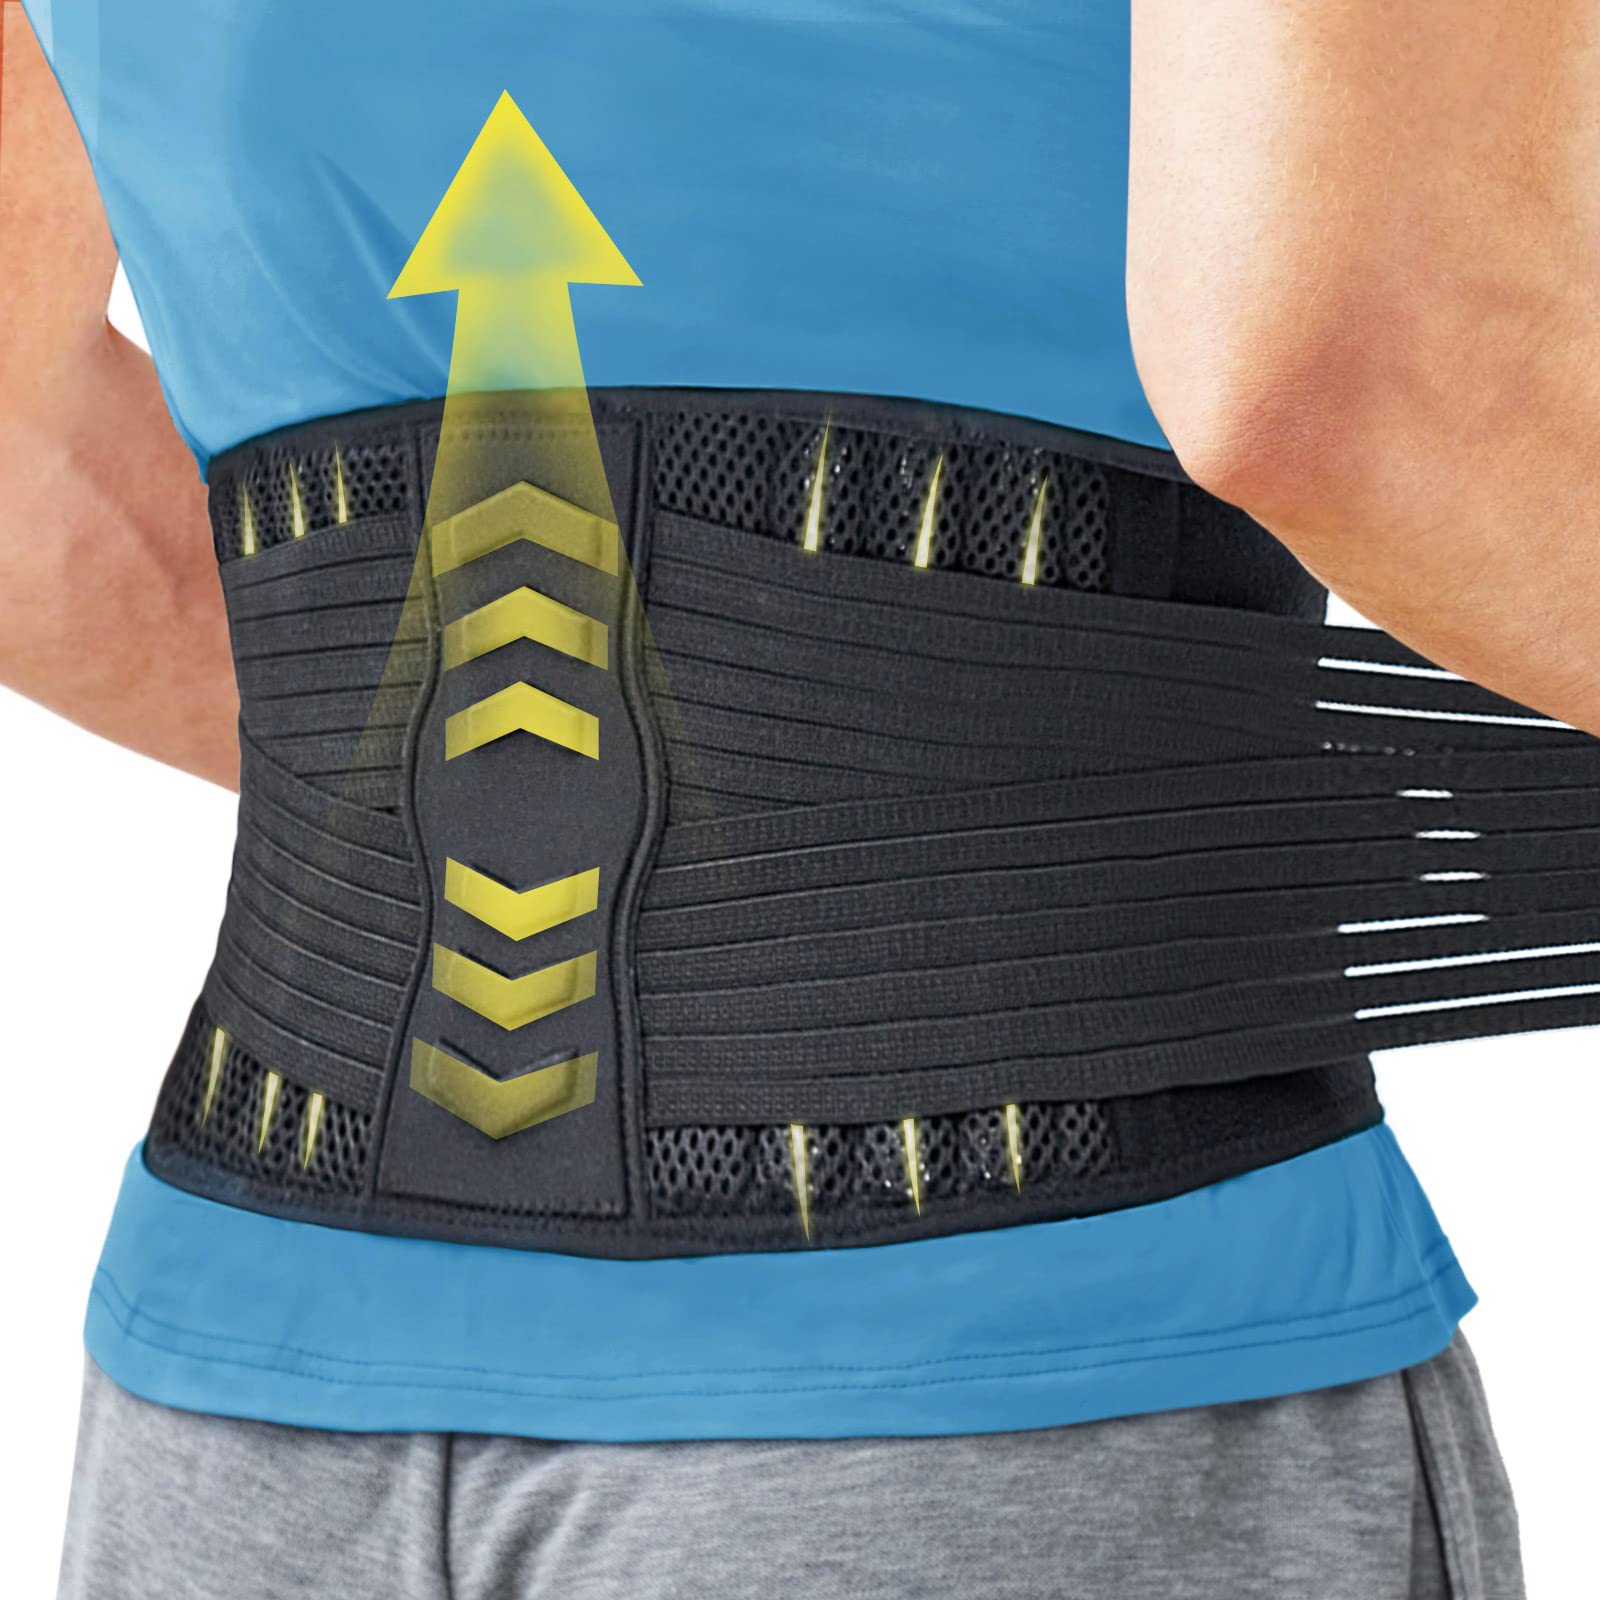 Sports Adjustable Back Brace Breathable Lumbar Support Belt for Lower Back  Pain, Herniated Disc, Sciatica Relief, Work Lifting